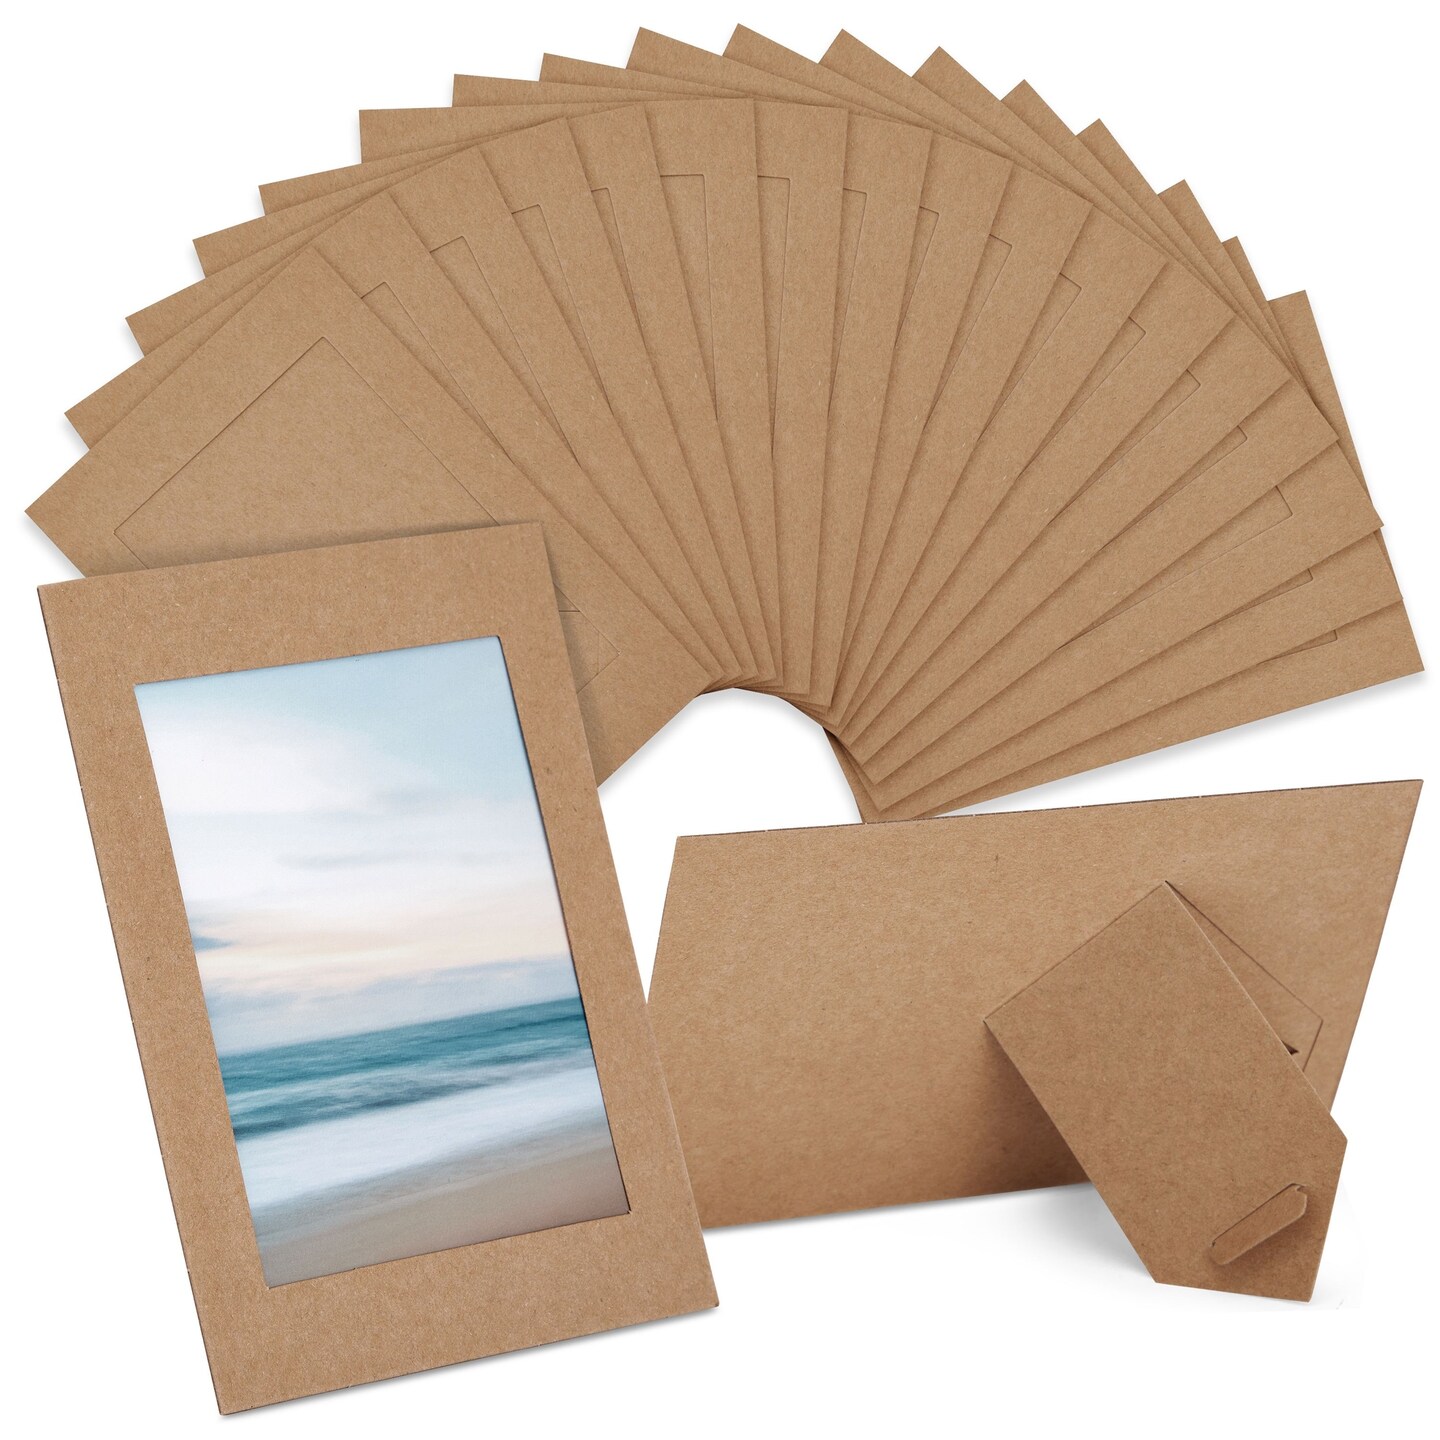 Juvale Cardboard Photo Picture Frame Easel (50 Pack) 4 x 6 Inches